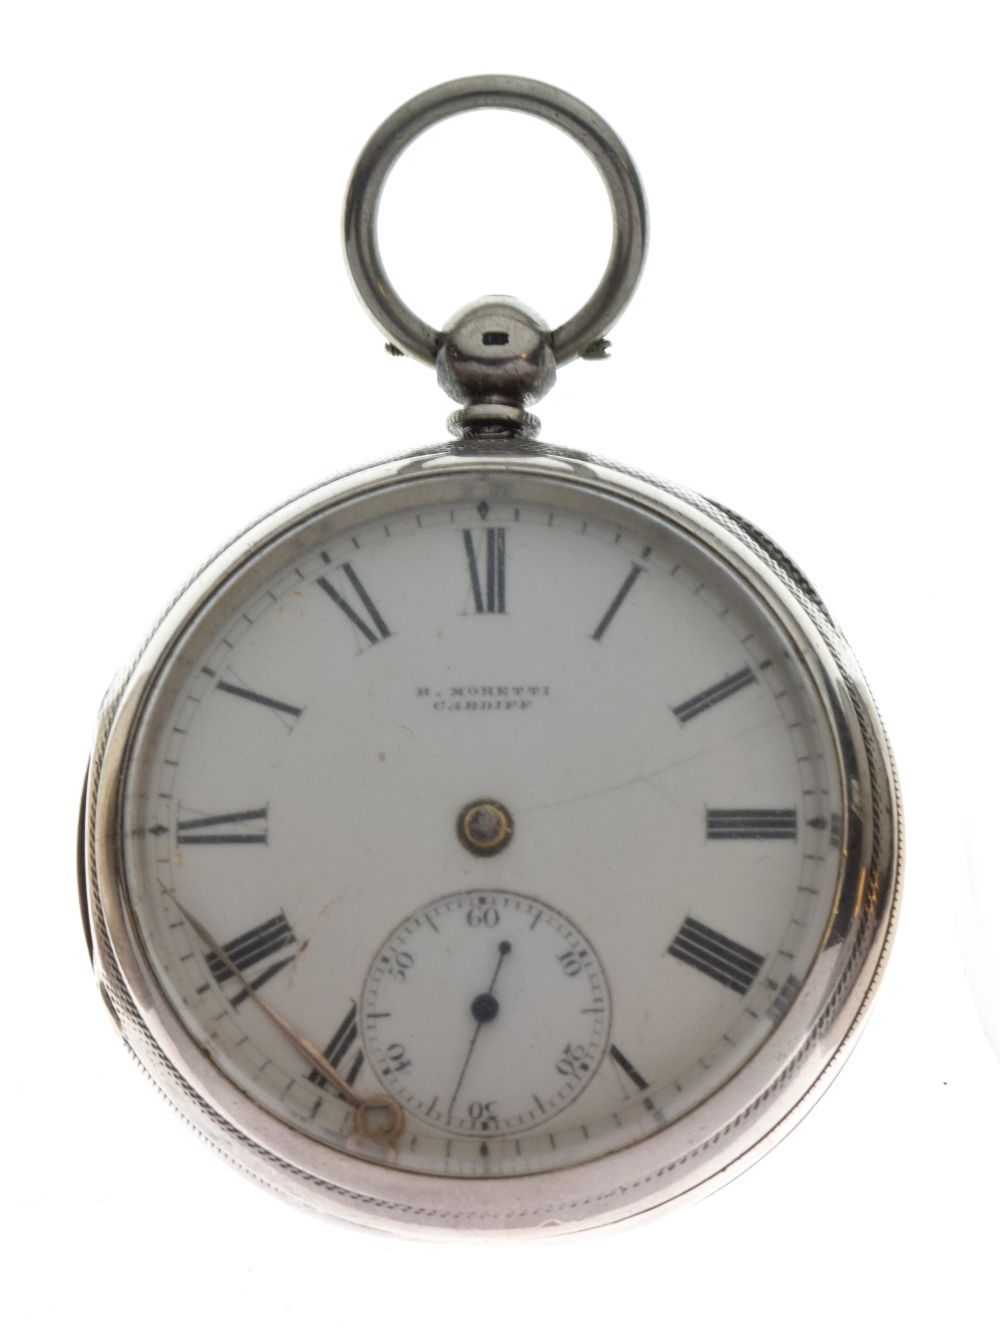 Welsh Interest - Victorian silver-cased open-face pocket watch, R. Moretti, Cardiff, white Roman